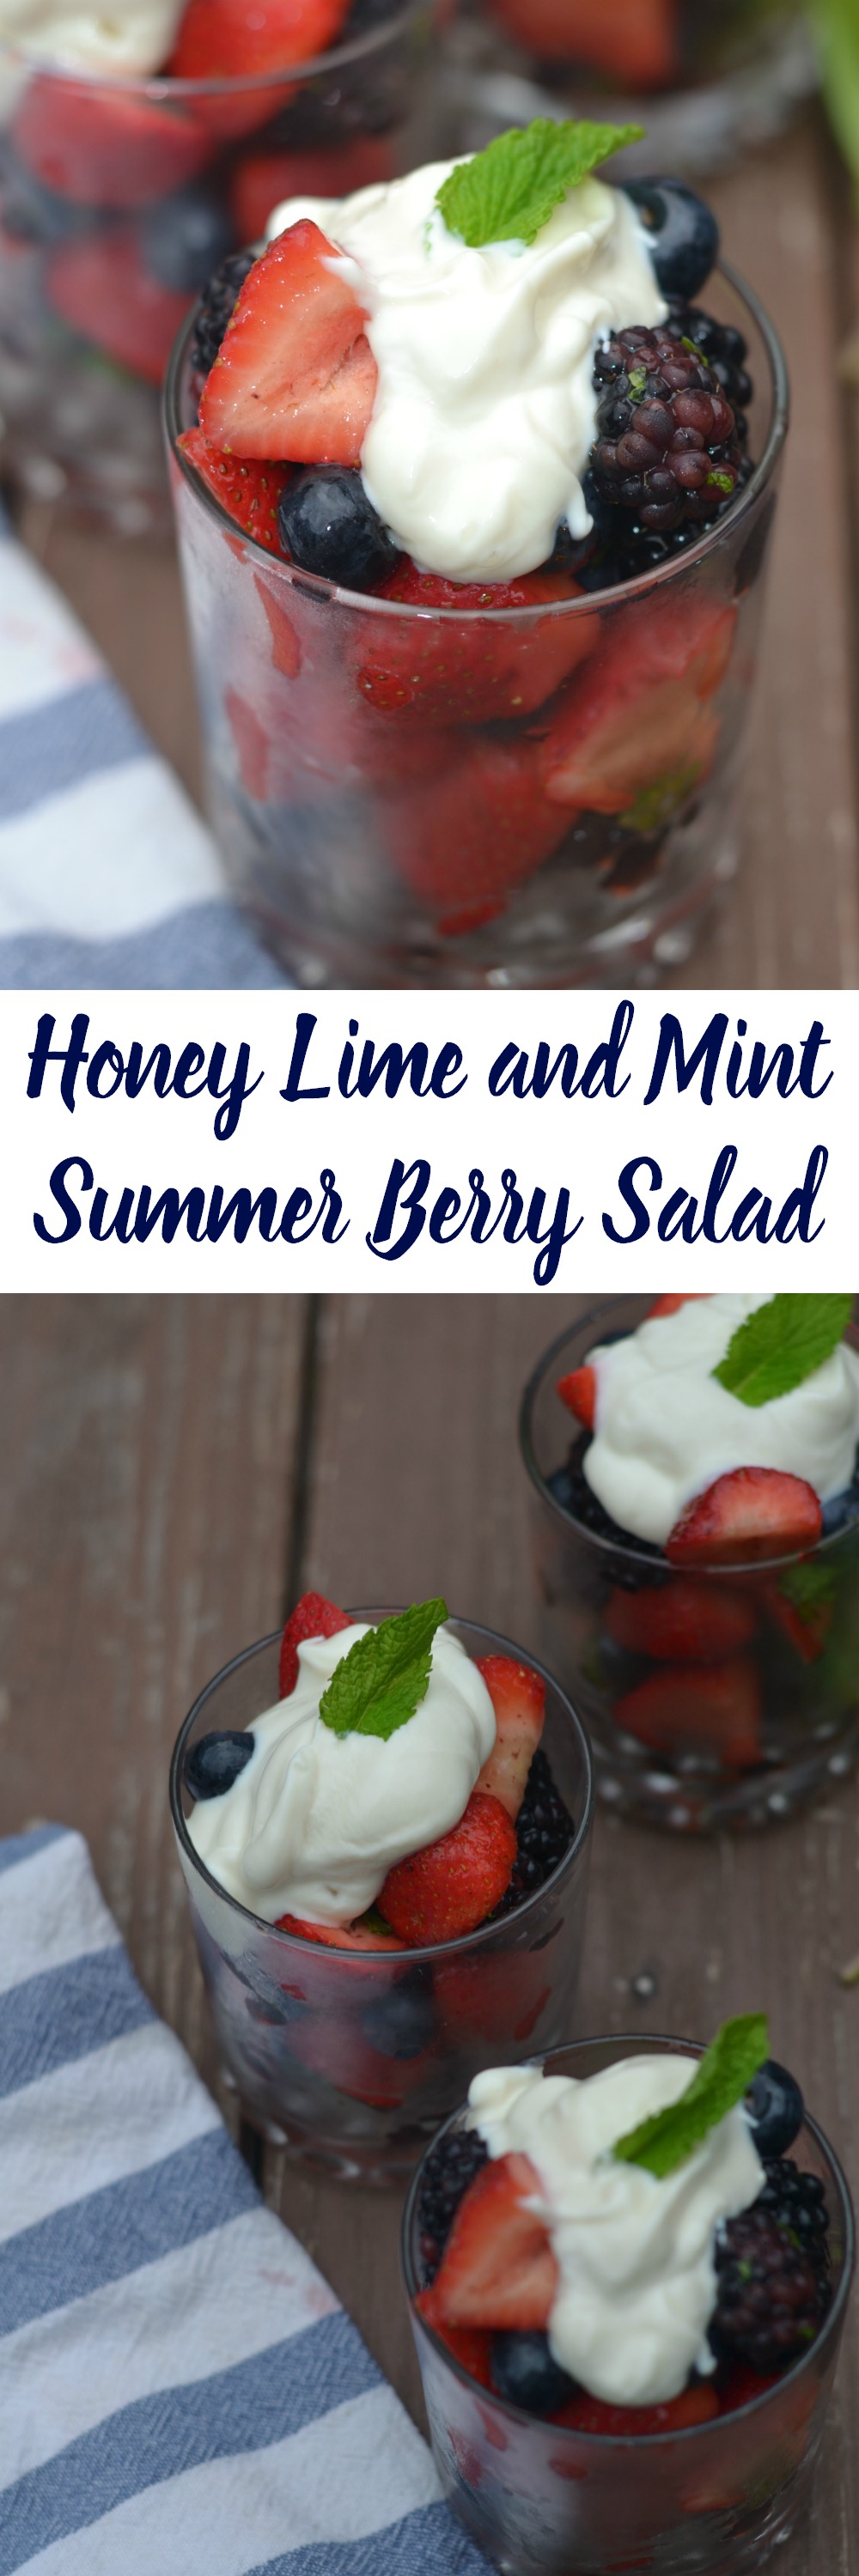 This Honey Lime and Mint Summer Salad is delicious and so easy to make. Perfect salad for a summer barbeque or party!